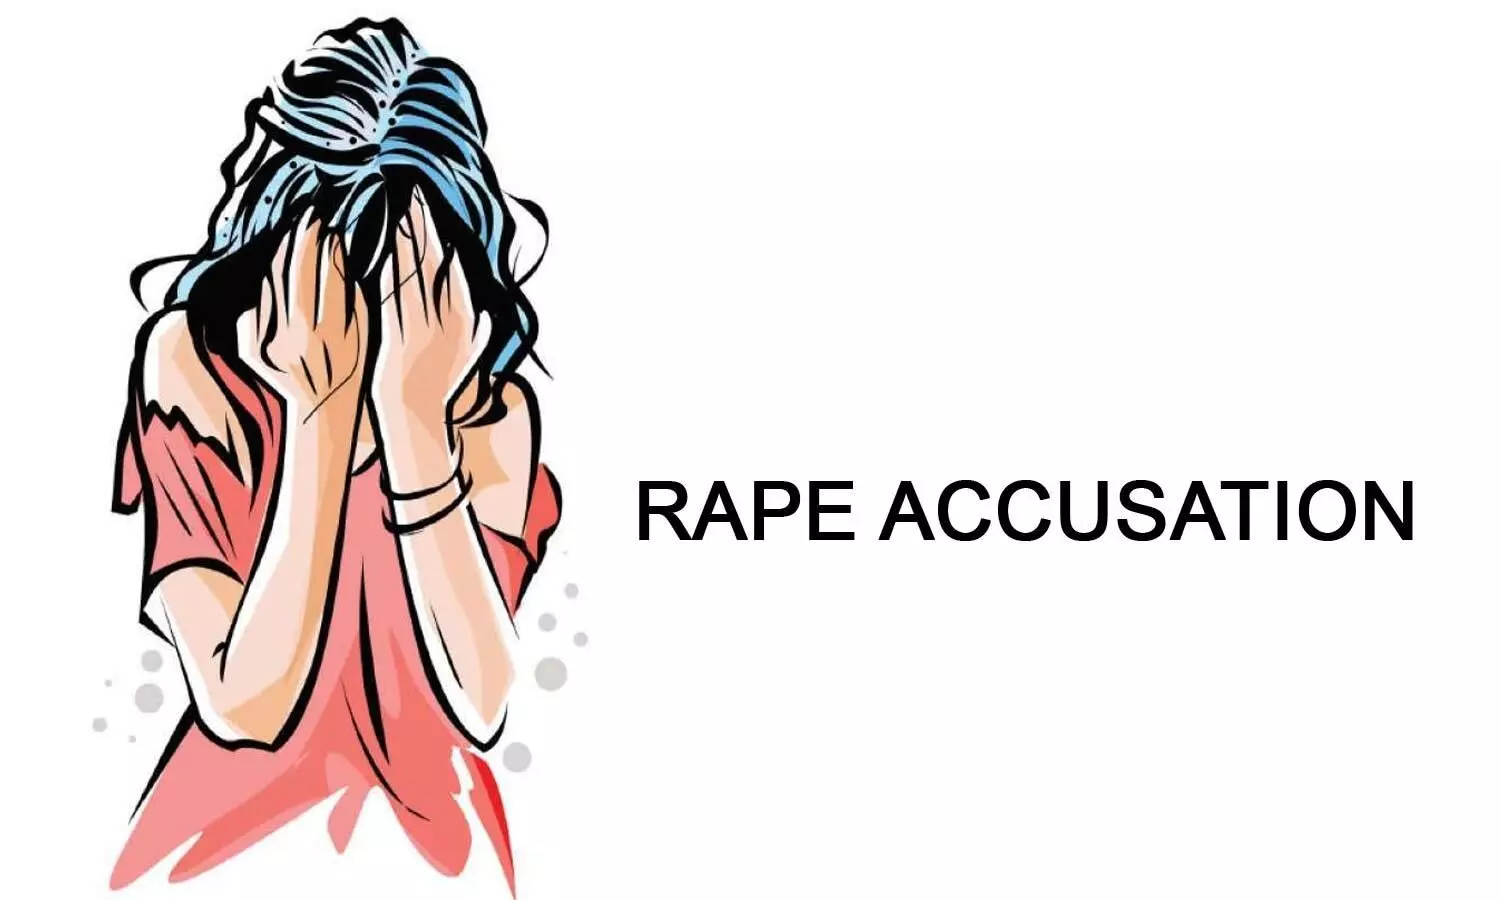 UP Doctor arrested over molestation, 2 rape attempts accusations by COVID patient